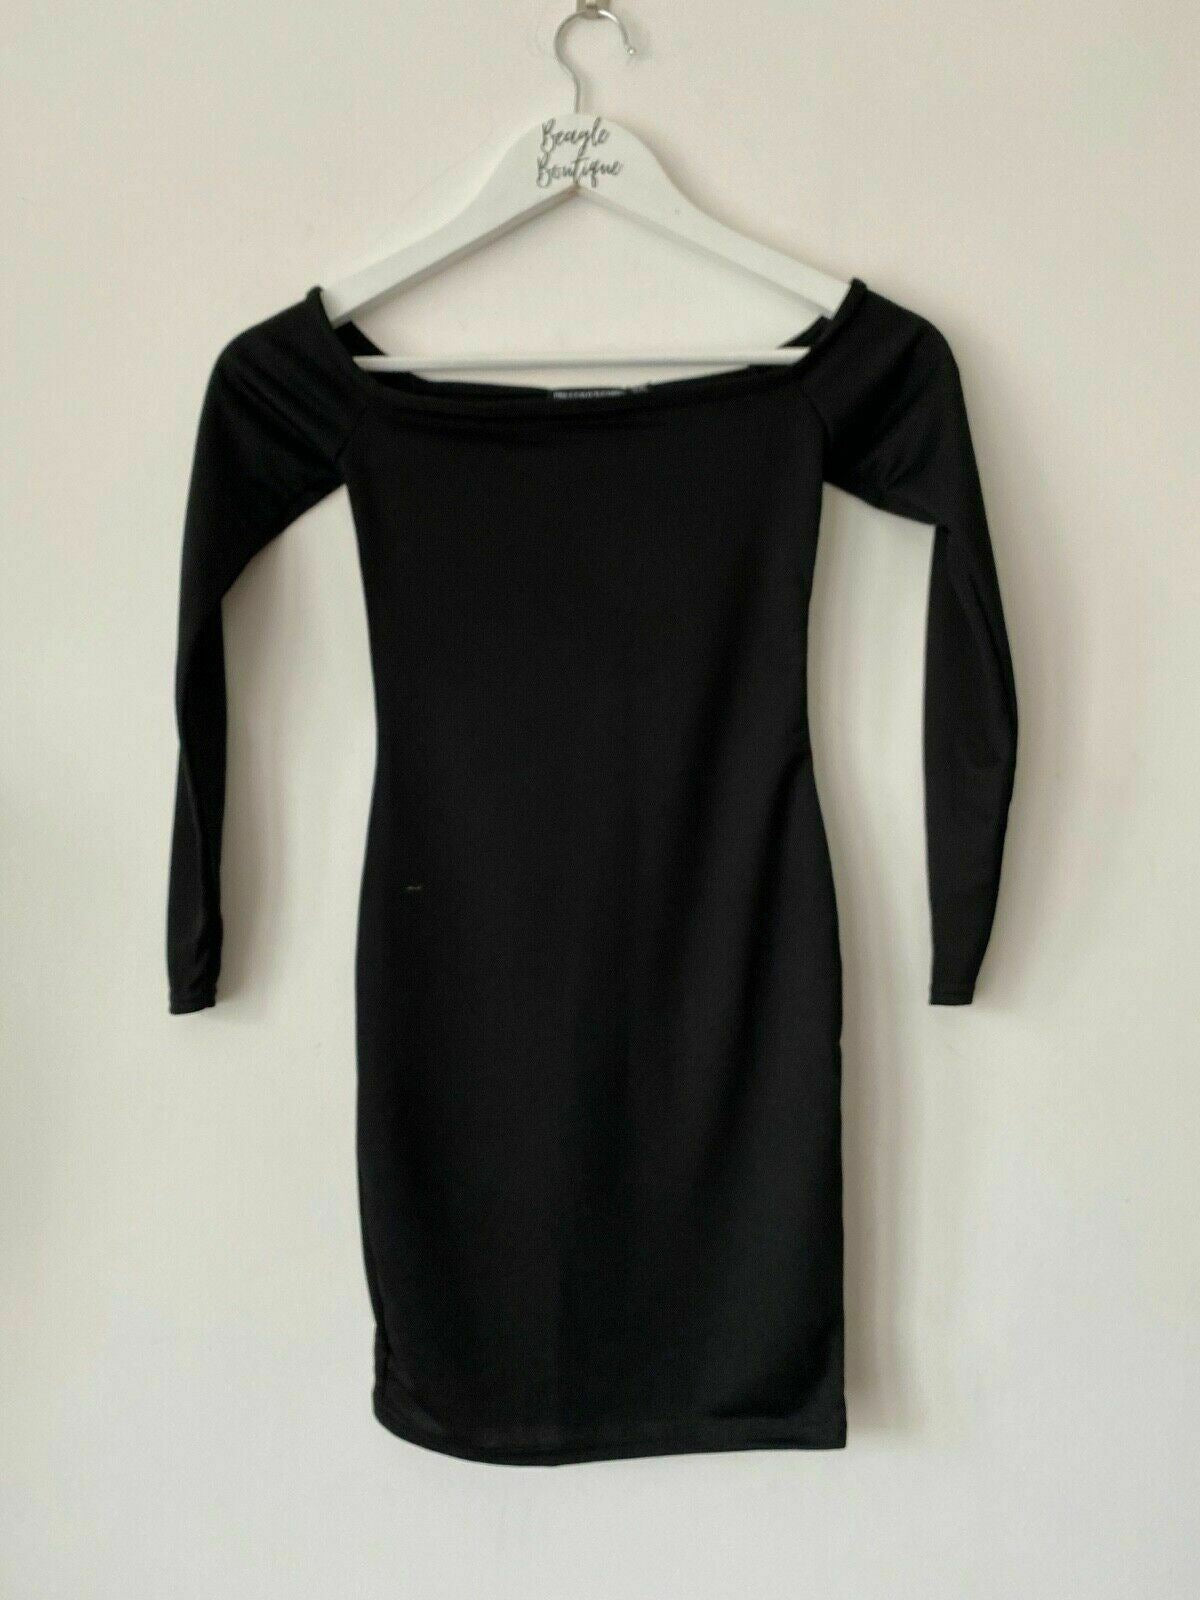 PrettyLittleThing Black Bardot Bodycon Dress Sizes 4 and 6 available